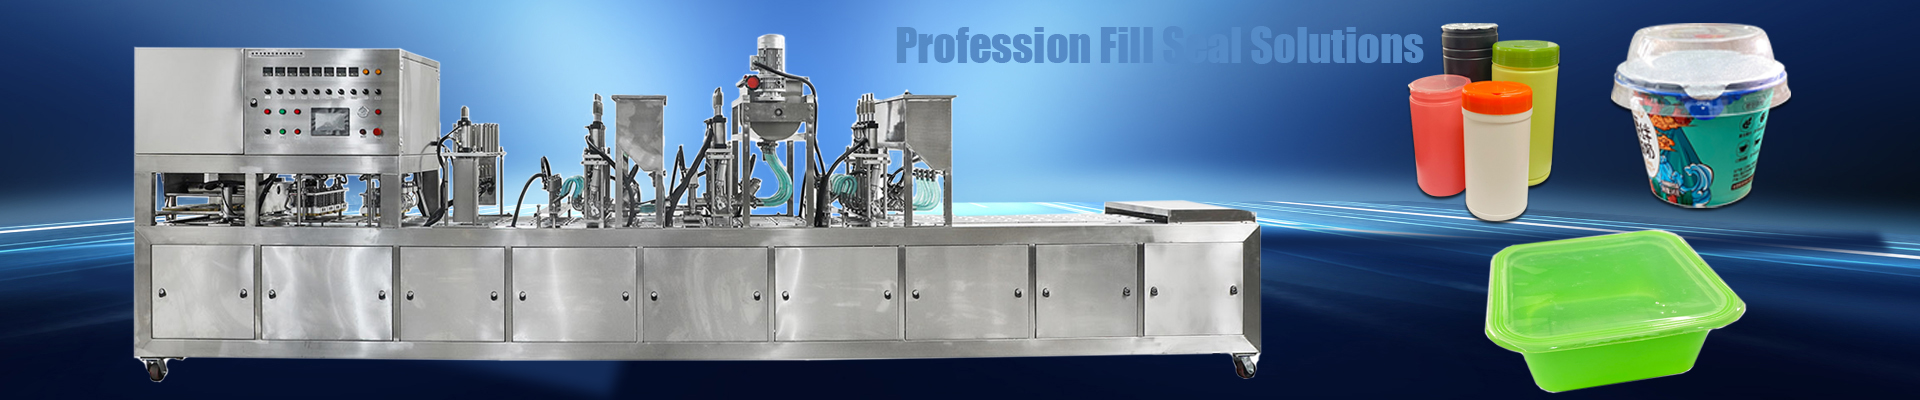 Profession fill seal solutions